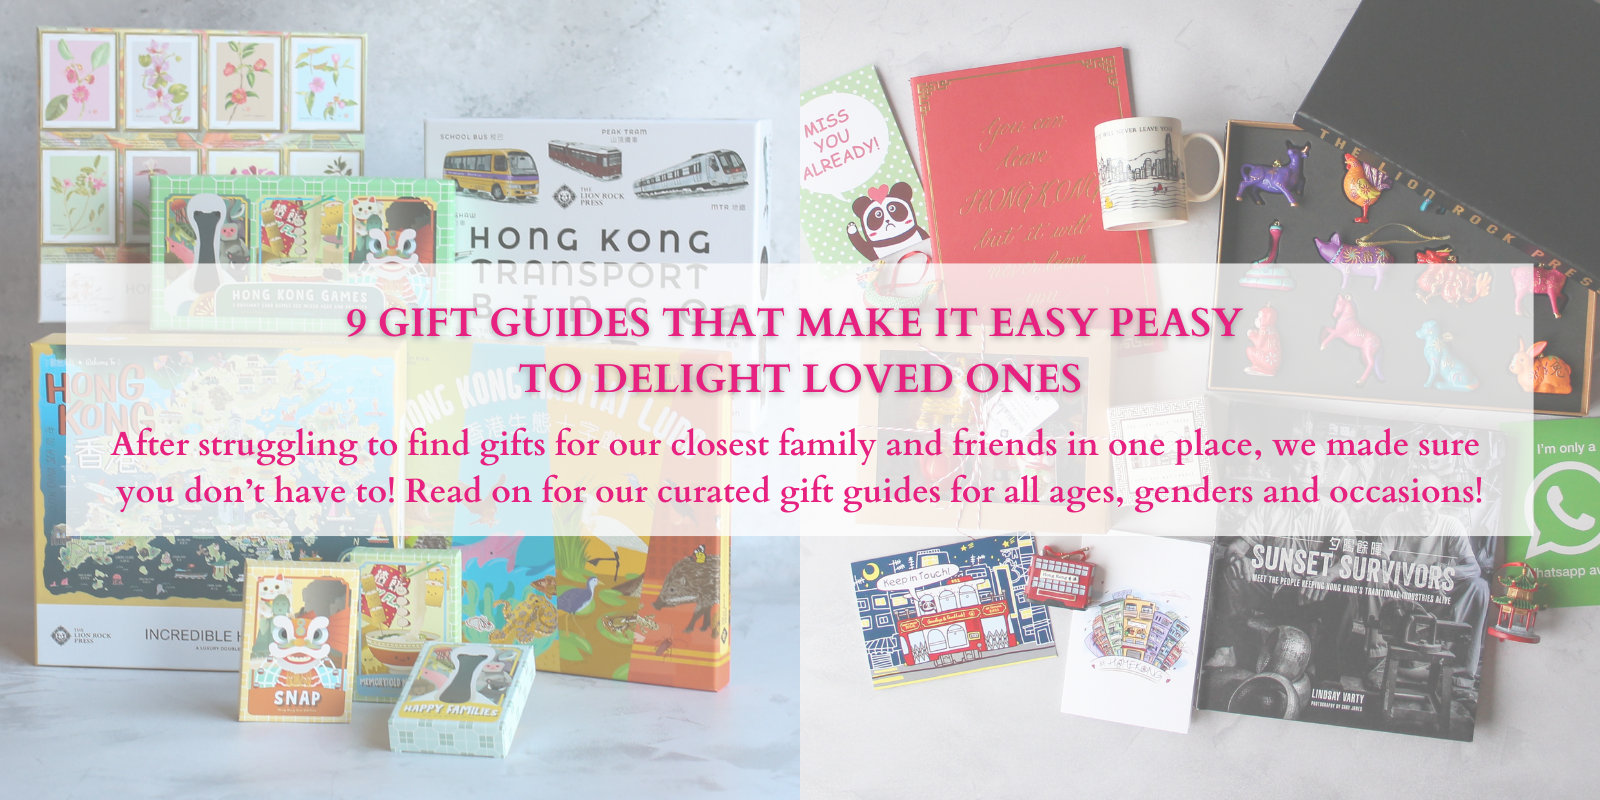 6 REASONS WHY WE ARE THE ONLY GIFT SHOP YOU NEED